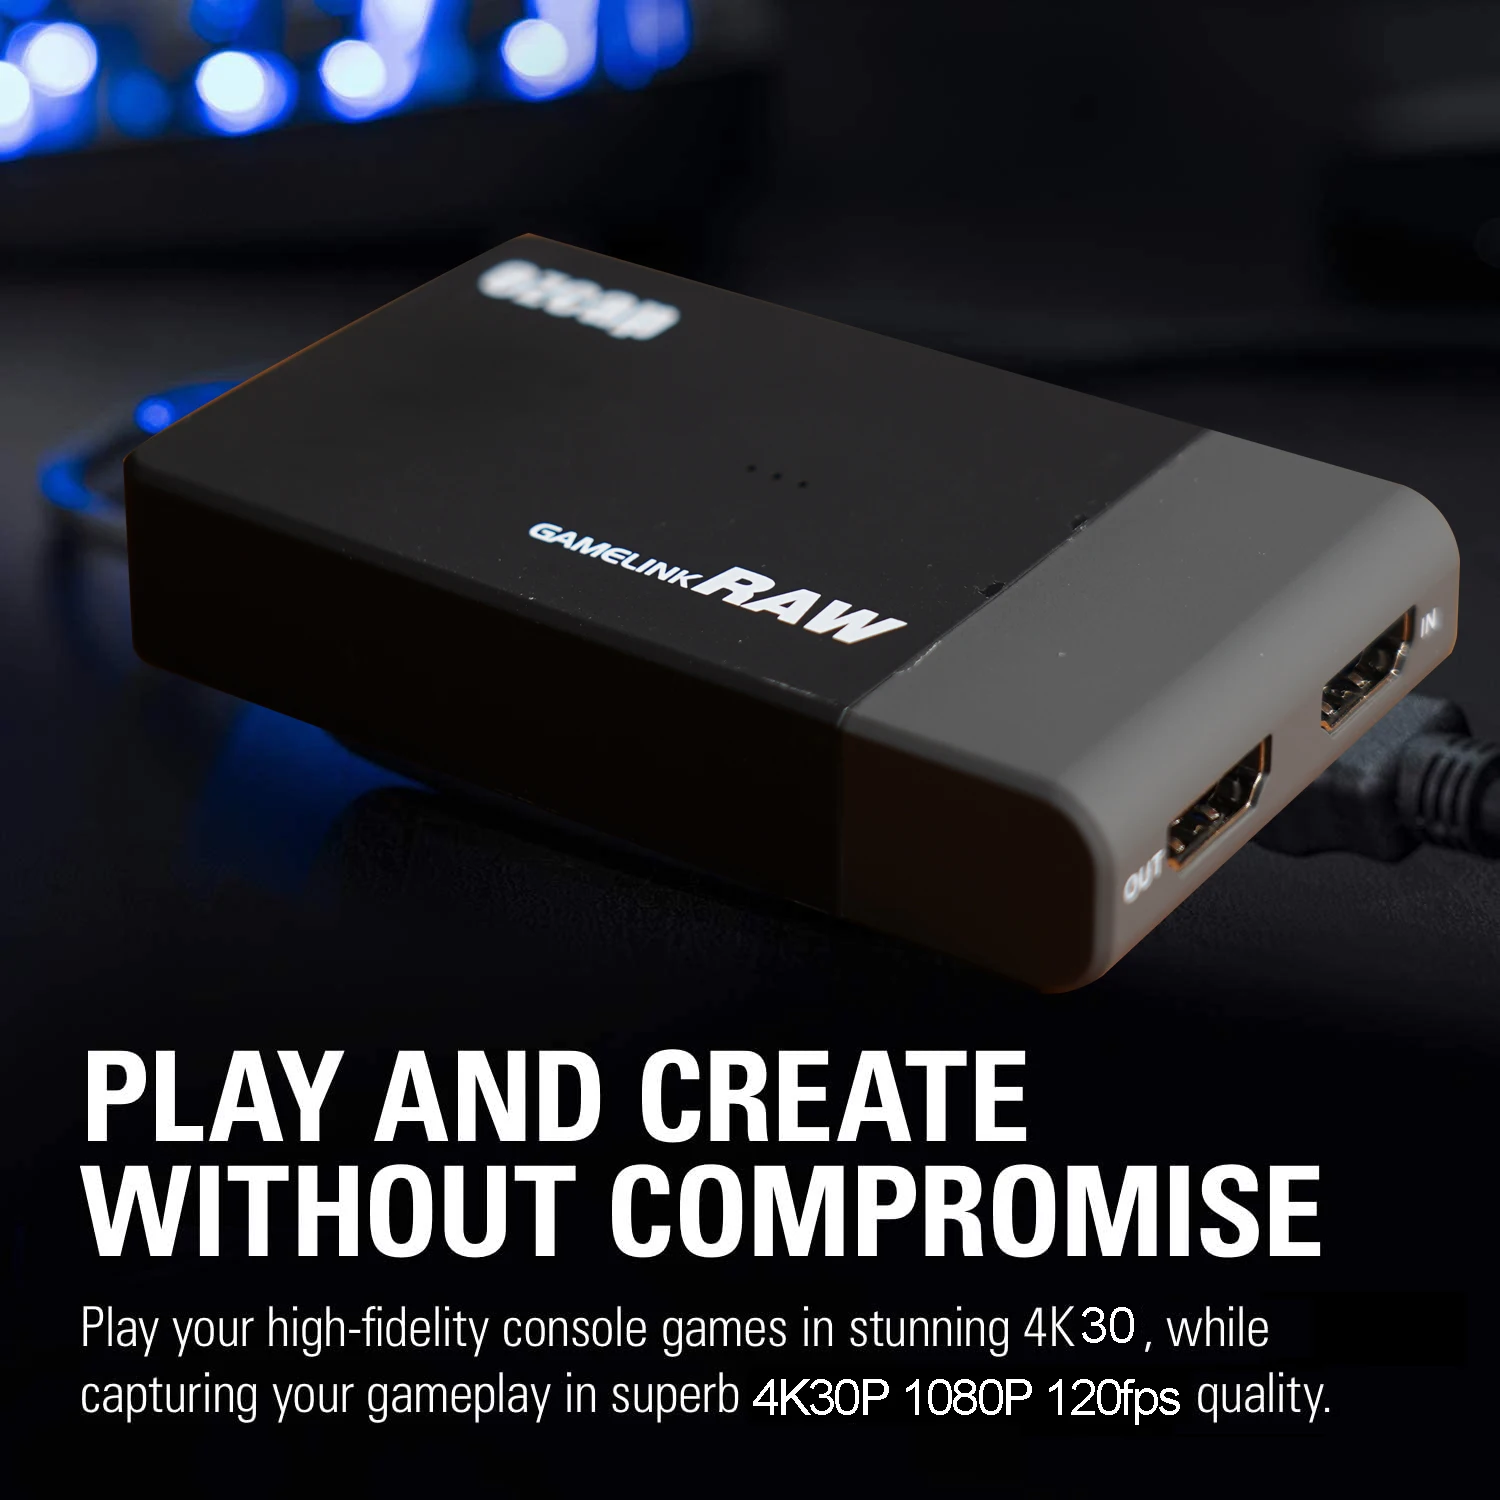 Y&H 4K30P 1080P 120HZ Video Capture Card HDMI-compatible USB3.0 Video Grabber Game Record for PS4, Xbox One, Nintendo Switch enlarge